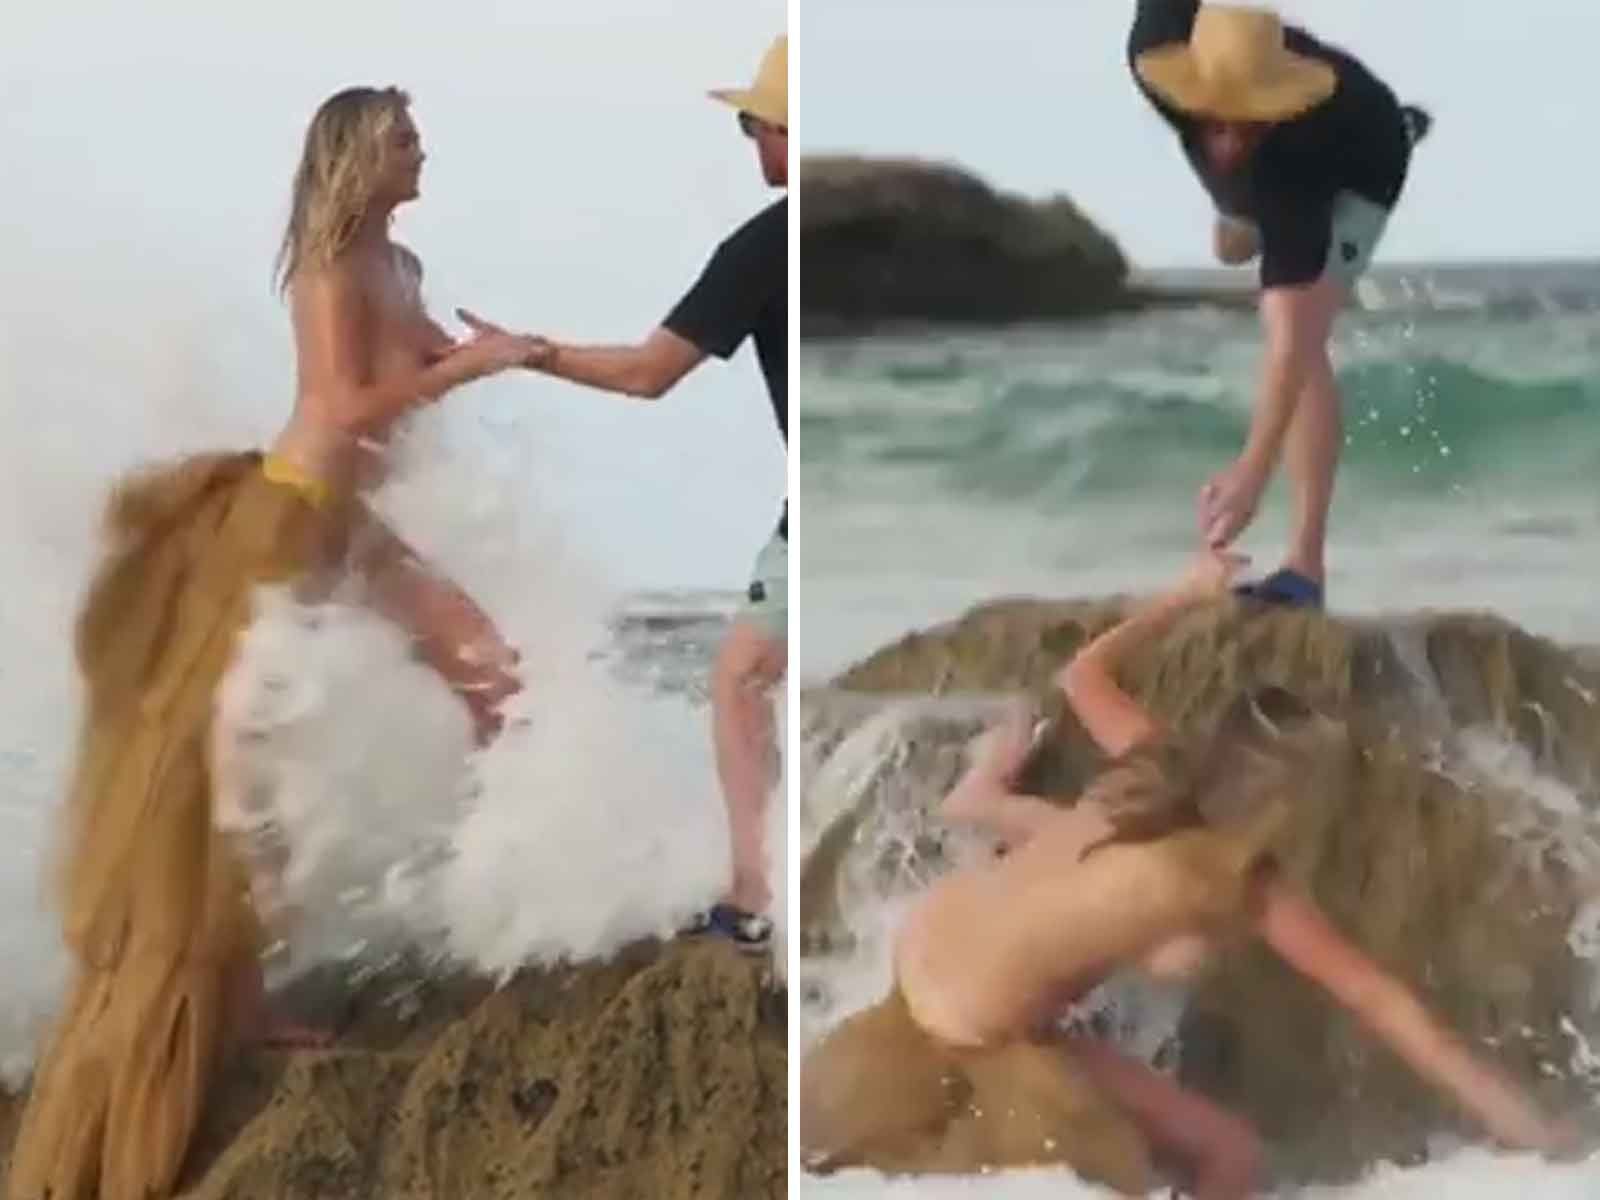 Kate Upton Swept Off Rock While Topless During Shoot